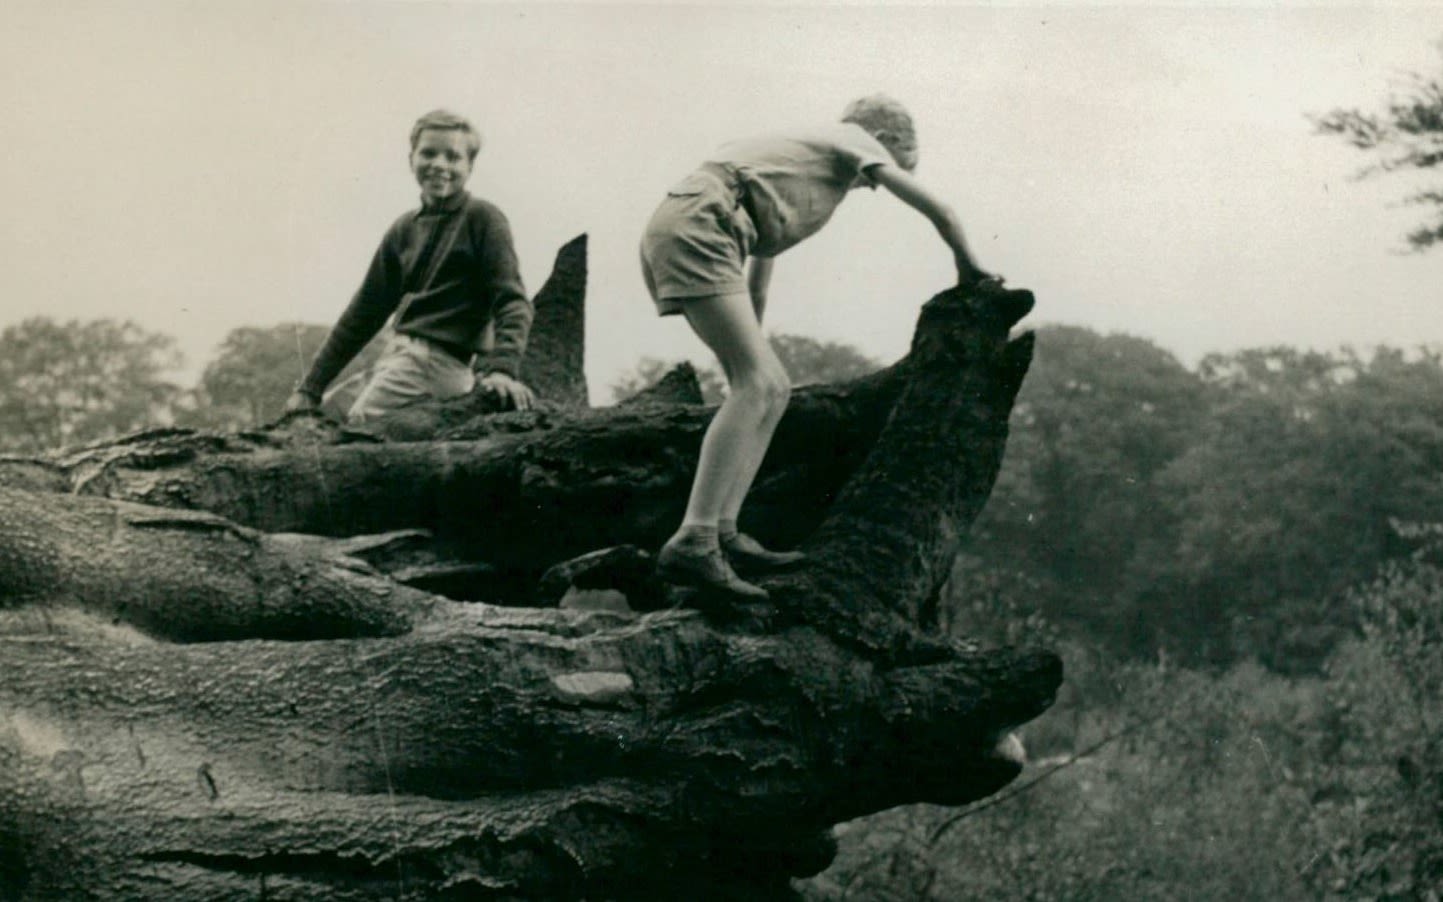 Black and white photo of a young Richard Branson playing on a tree branch